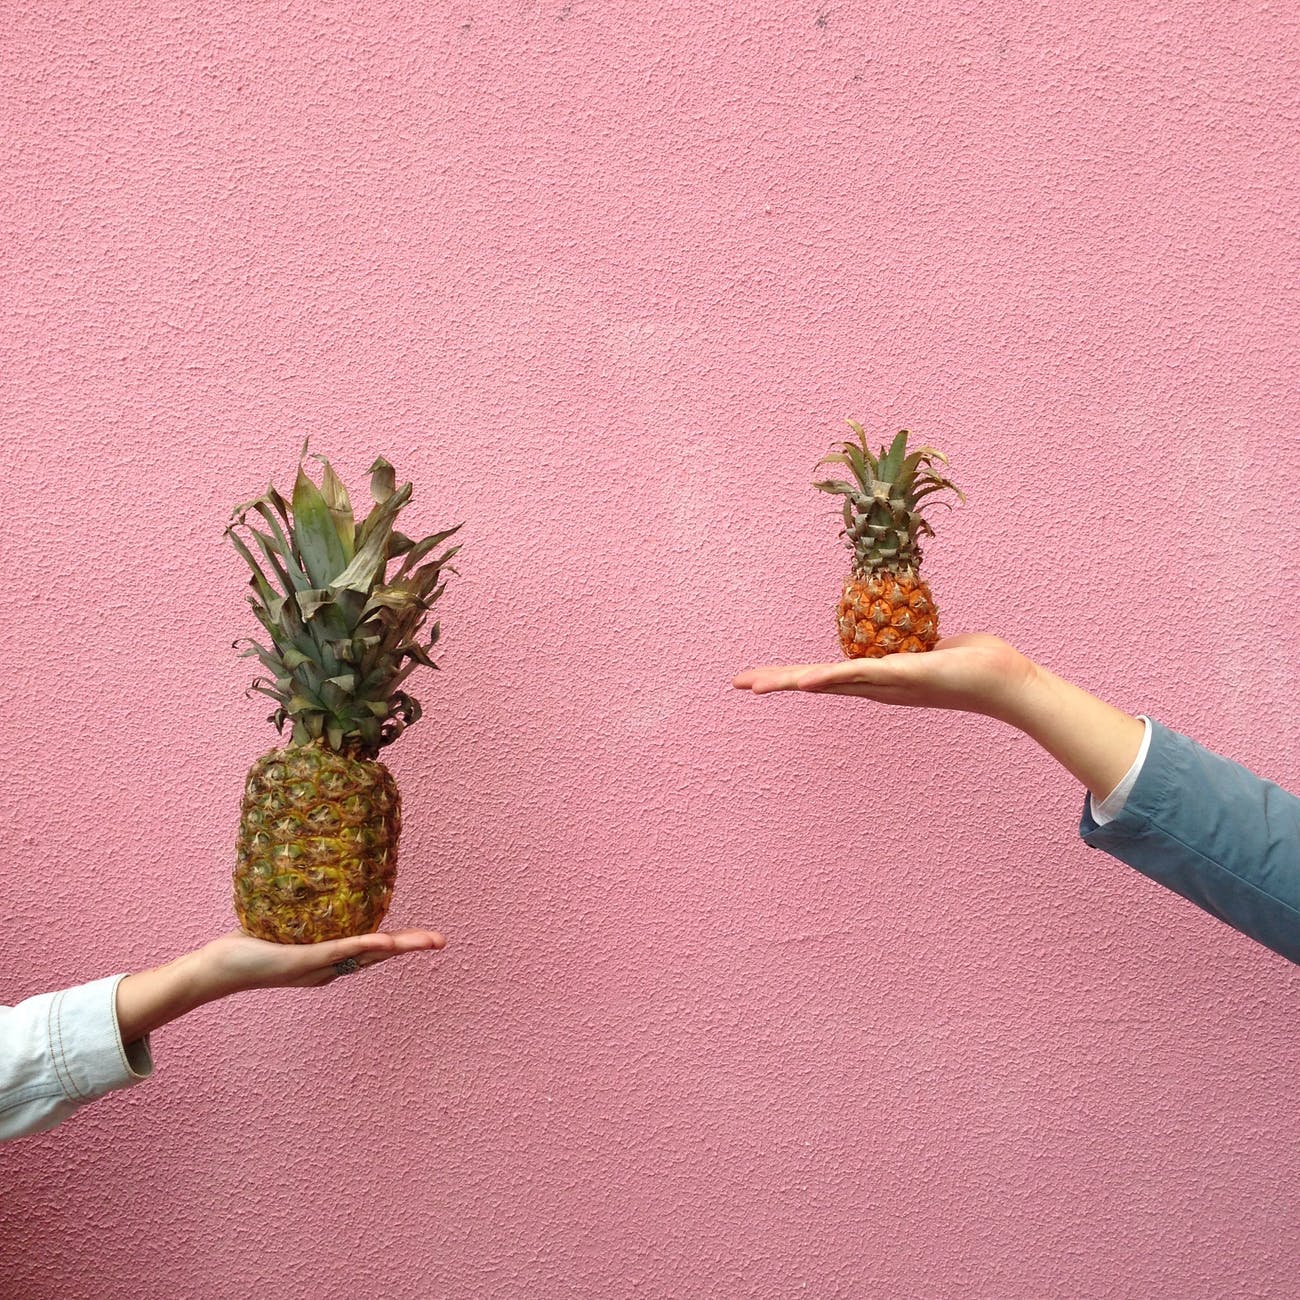 two people holding pineapple fruit on their palm